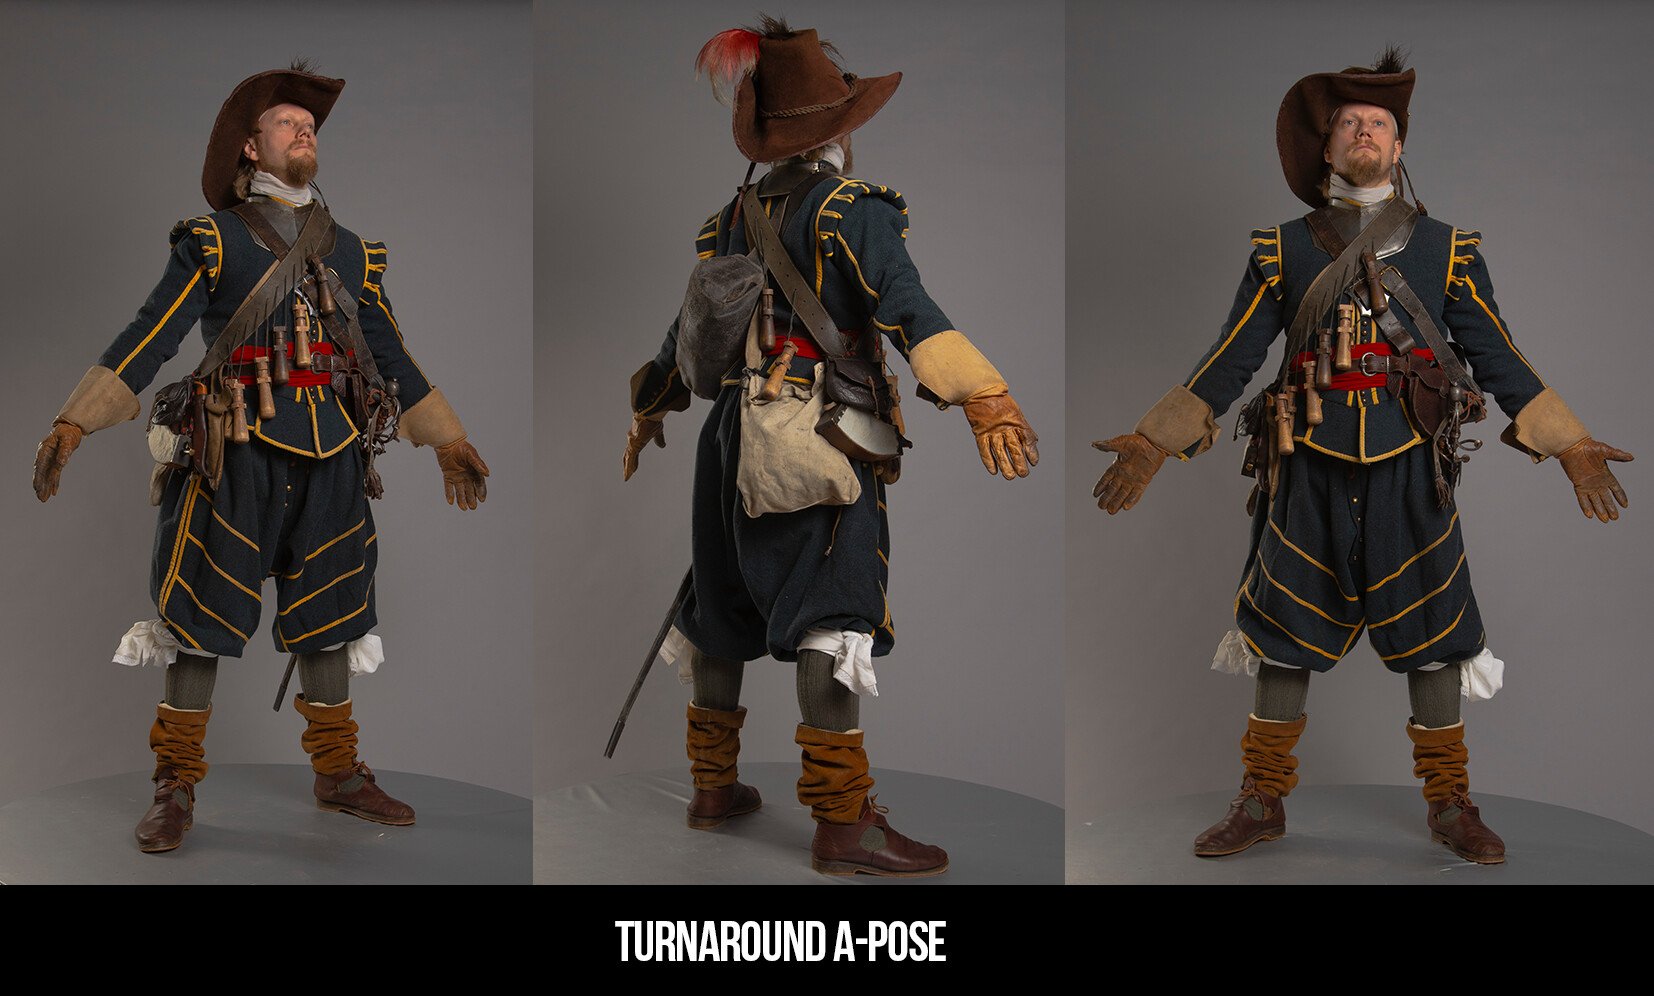 340+ Musketeer Reference Pictures